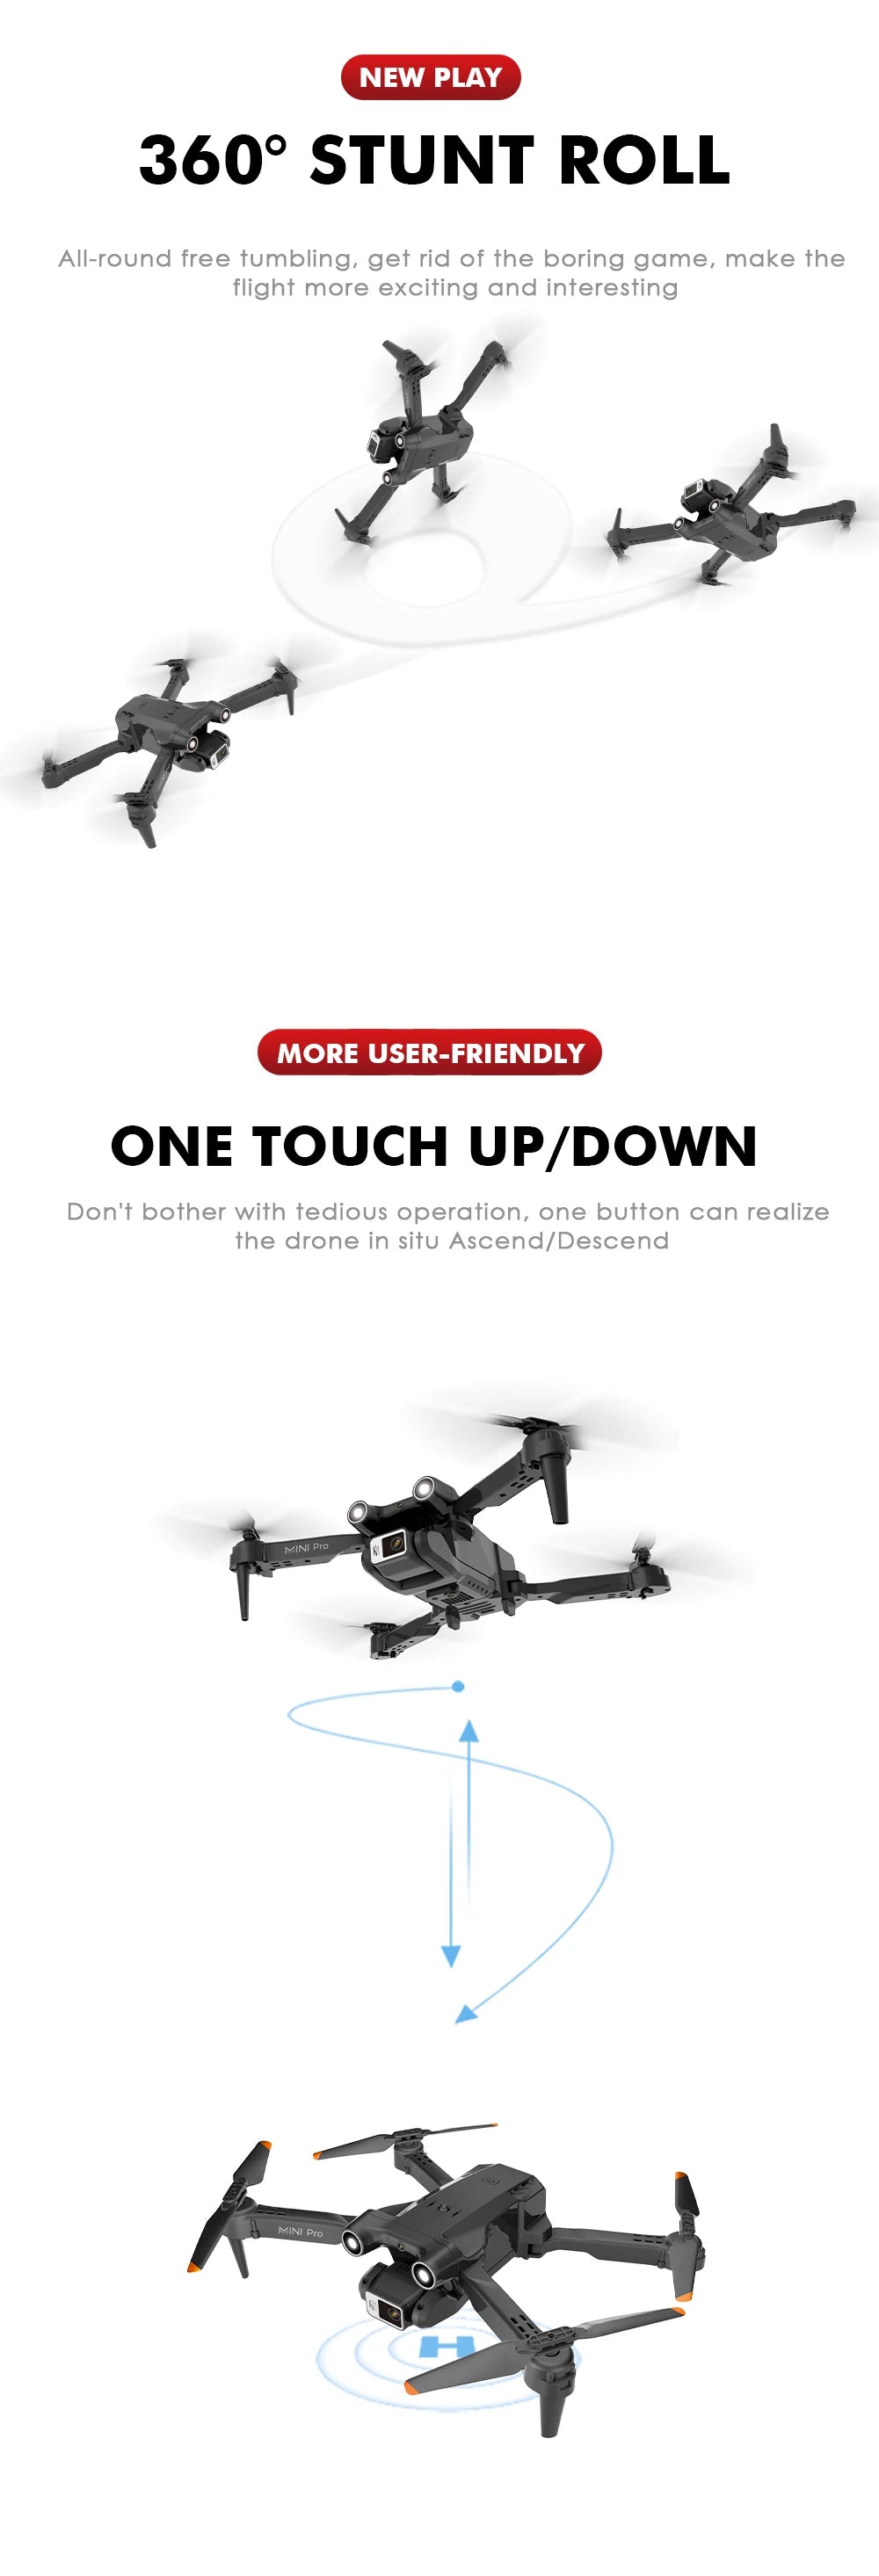 E63 Drone, new play 3600 stunt roll all-round free tumbling,